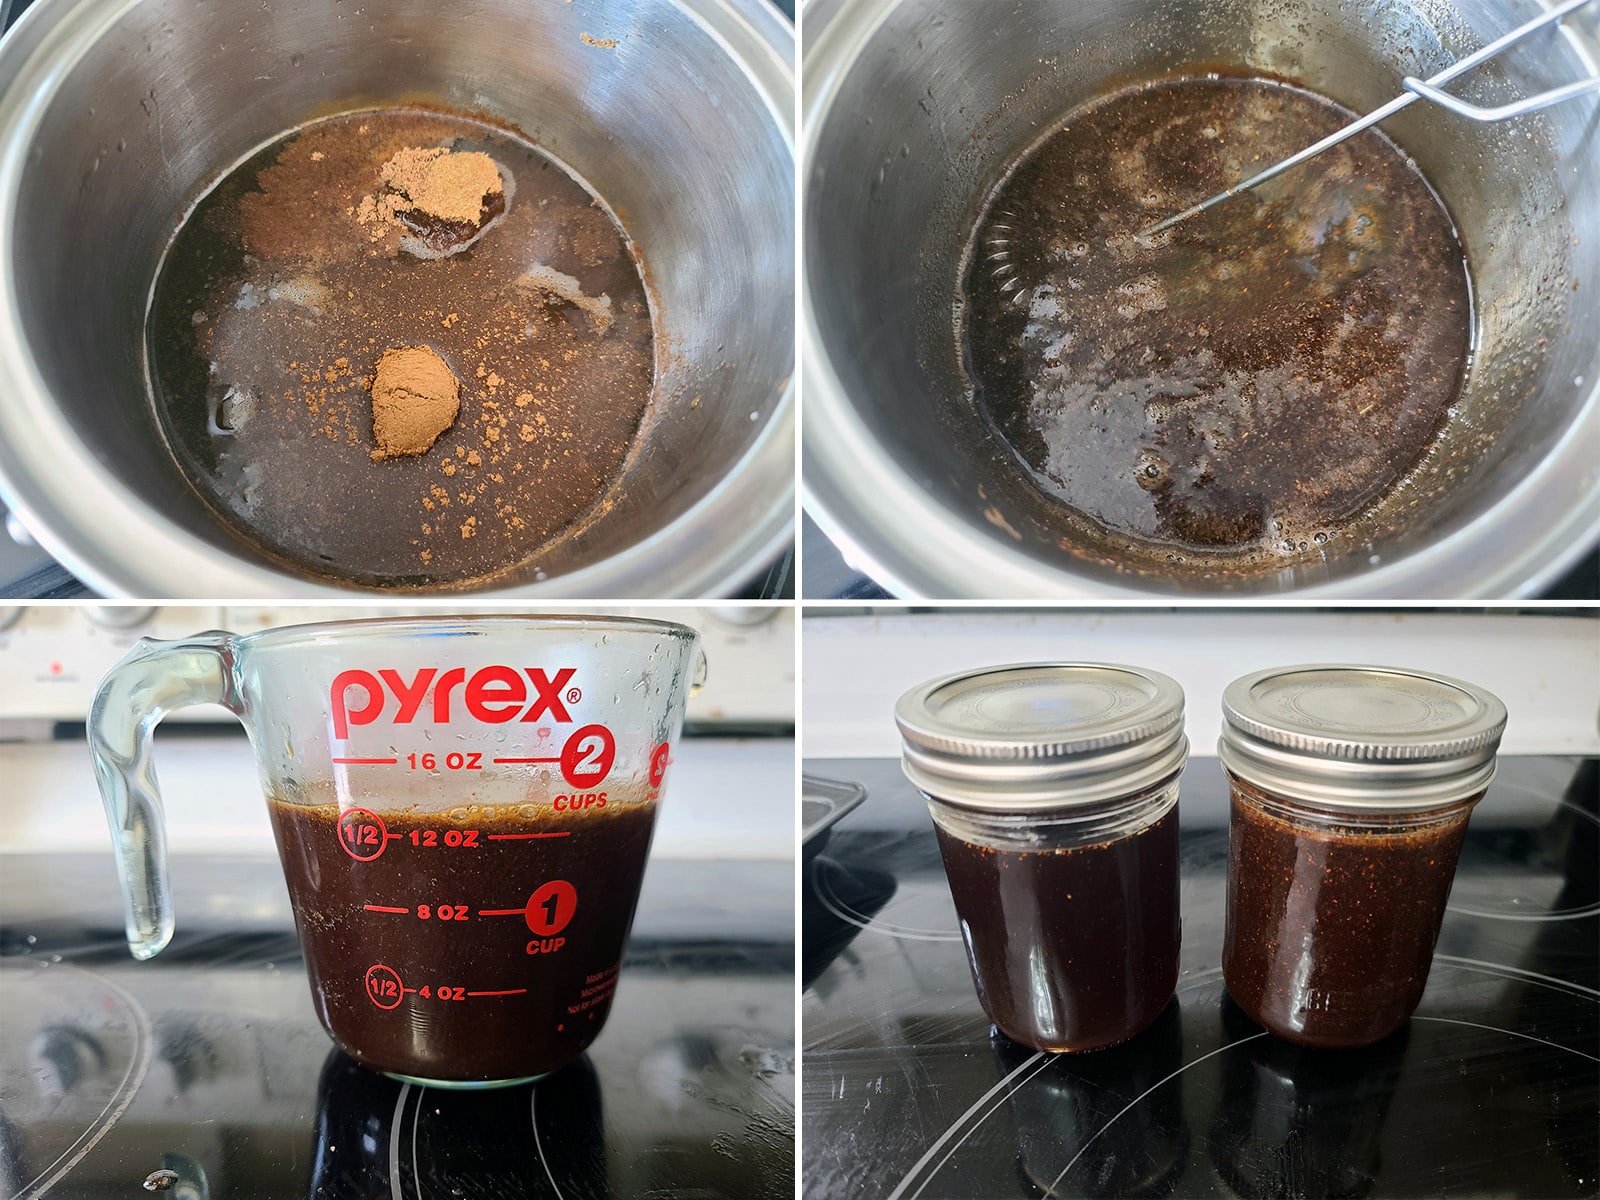 A 4 part image showing the apple crisp syrup being made and transferred to 2 jars.